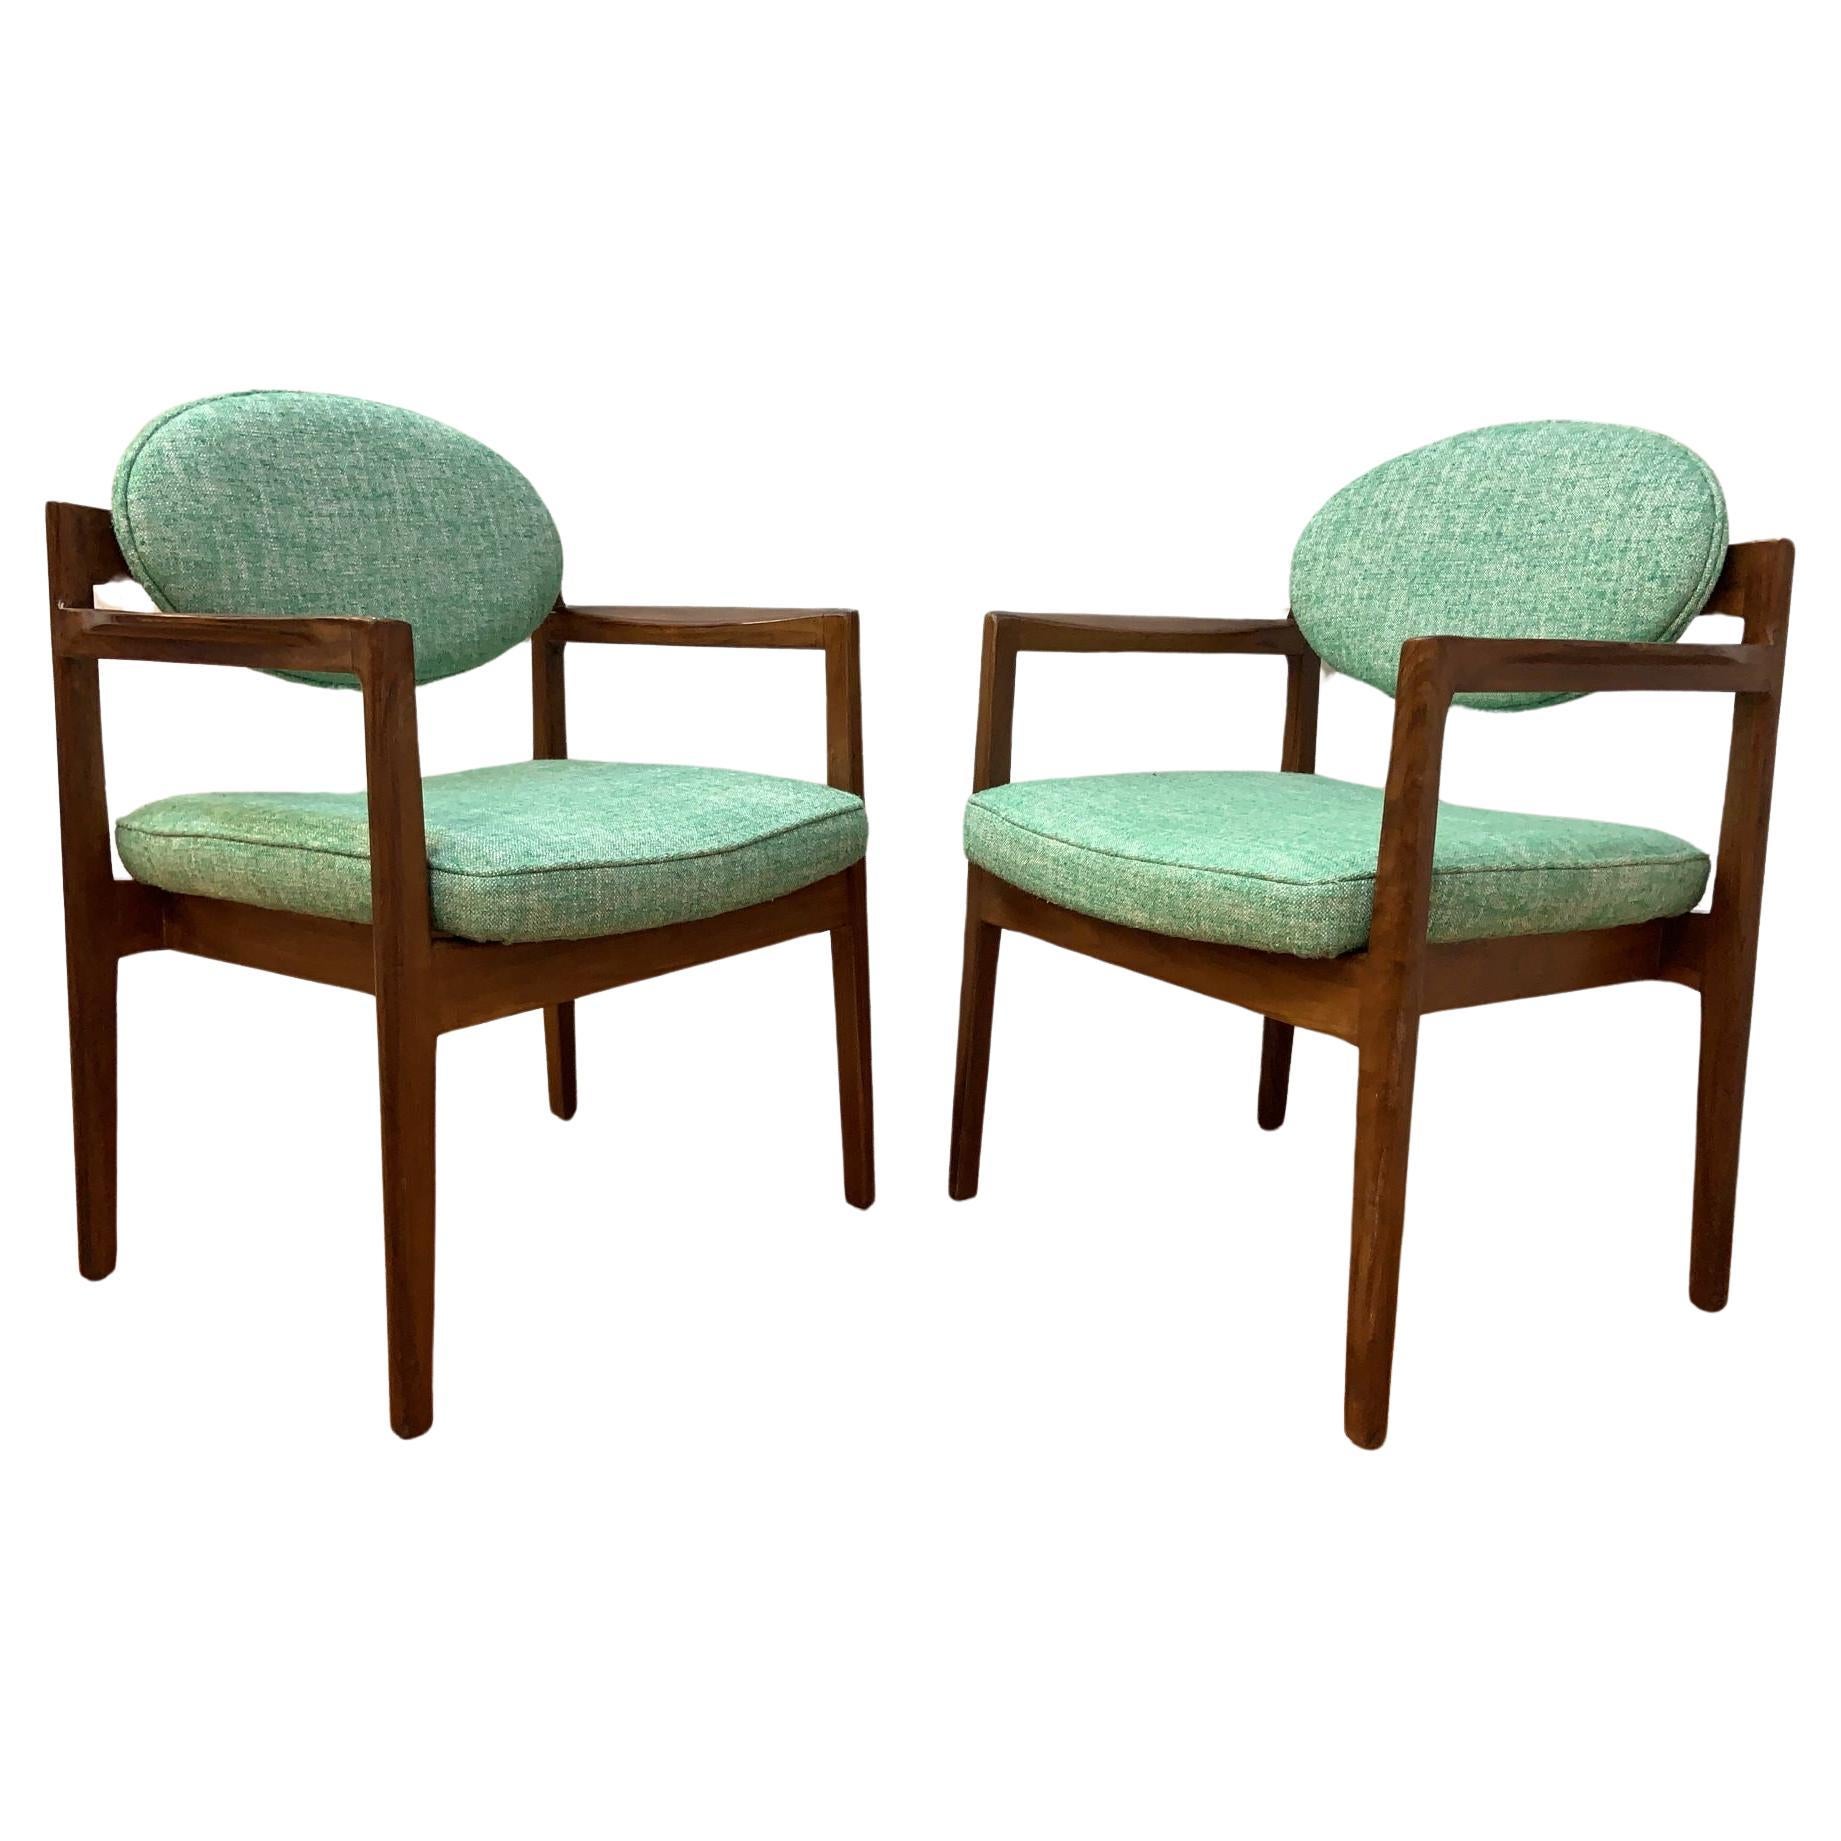 Mid Century Modern Oval-Back Armchairs by Jens Risom Newly Reupholstered - Pair